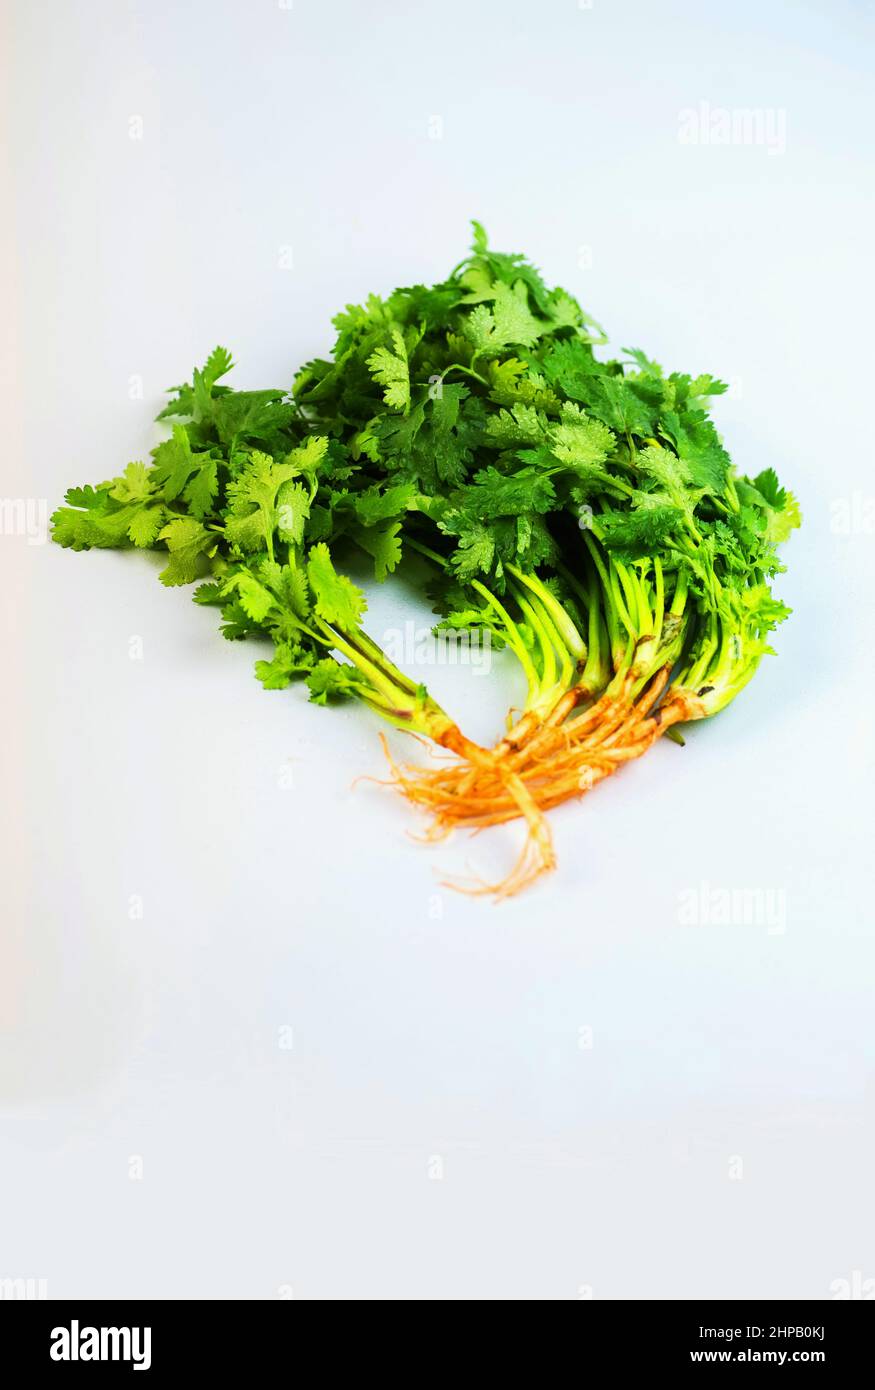 Green fresh coriander herb with roots on wet white table. Stock Photo